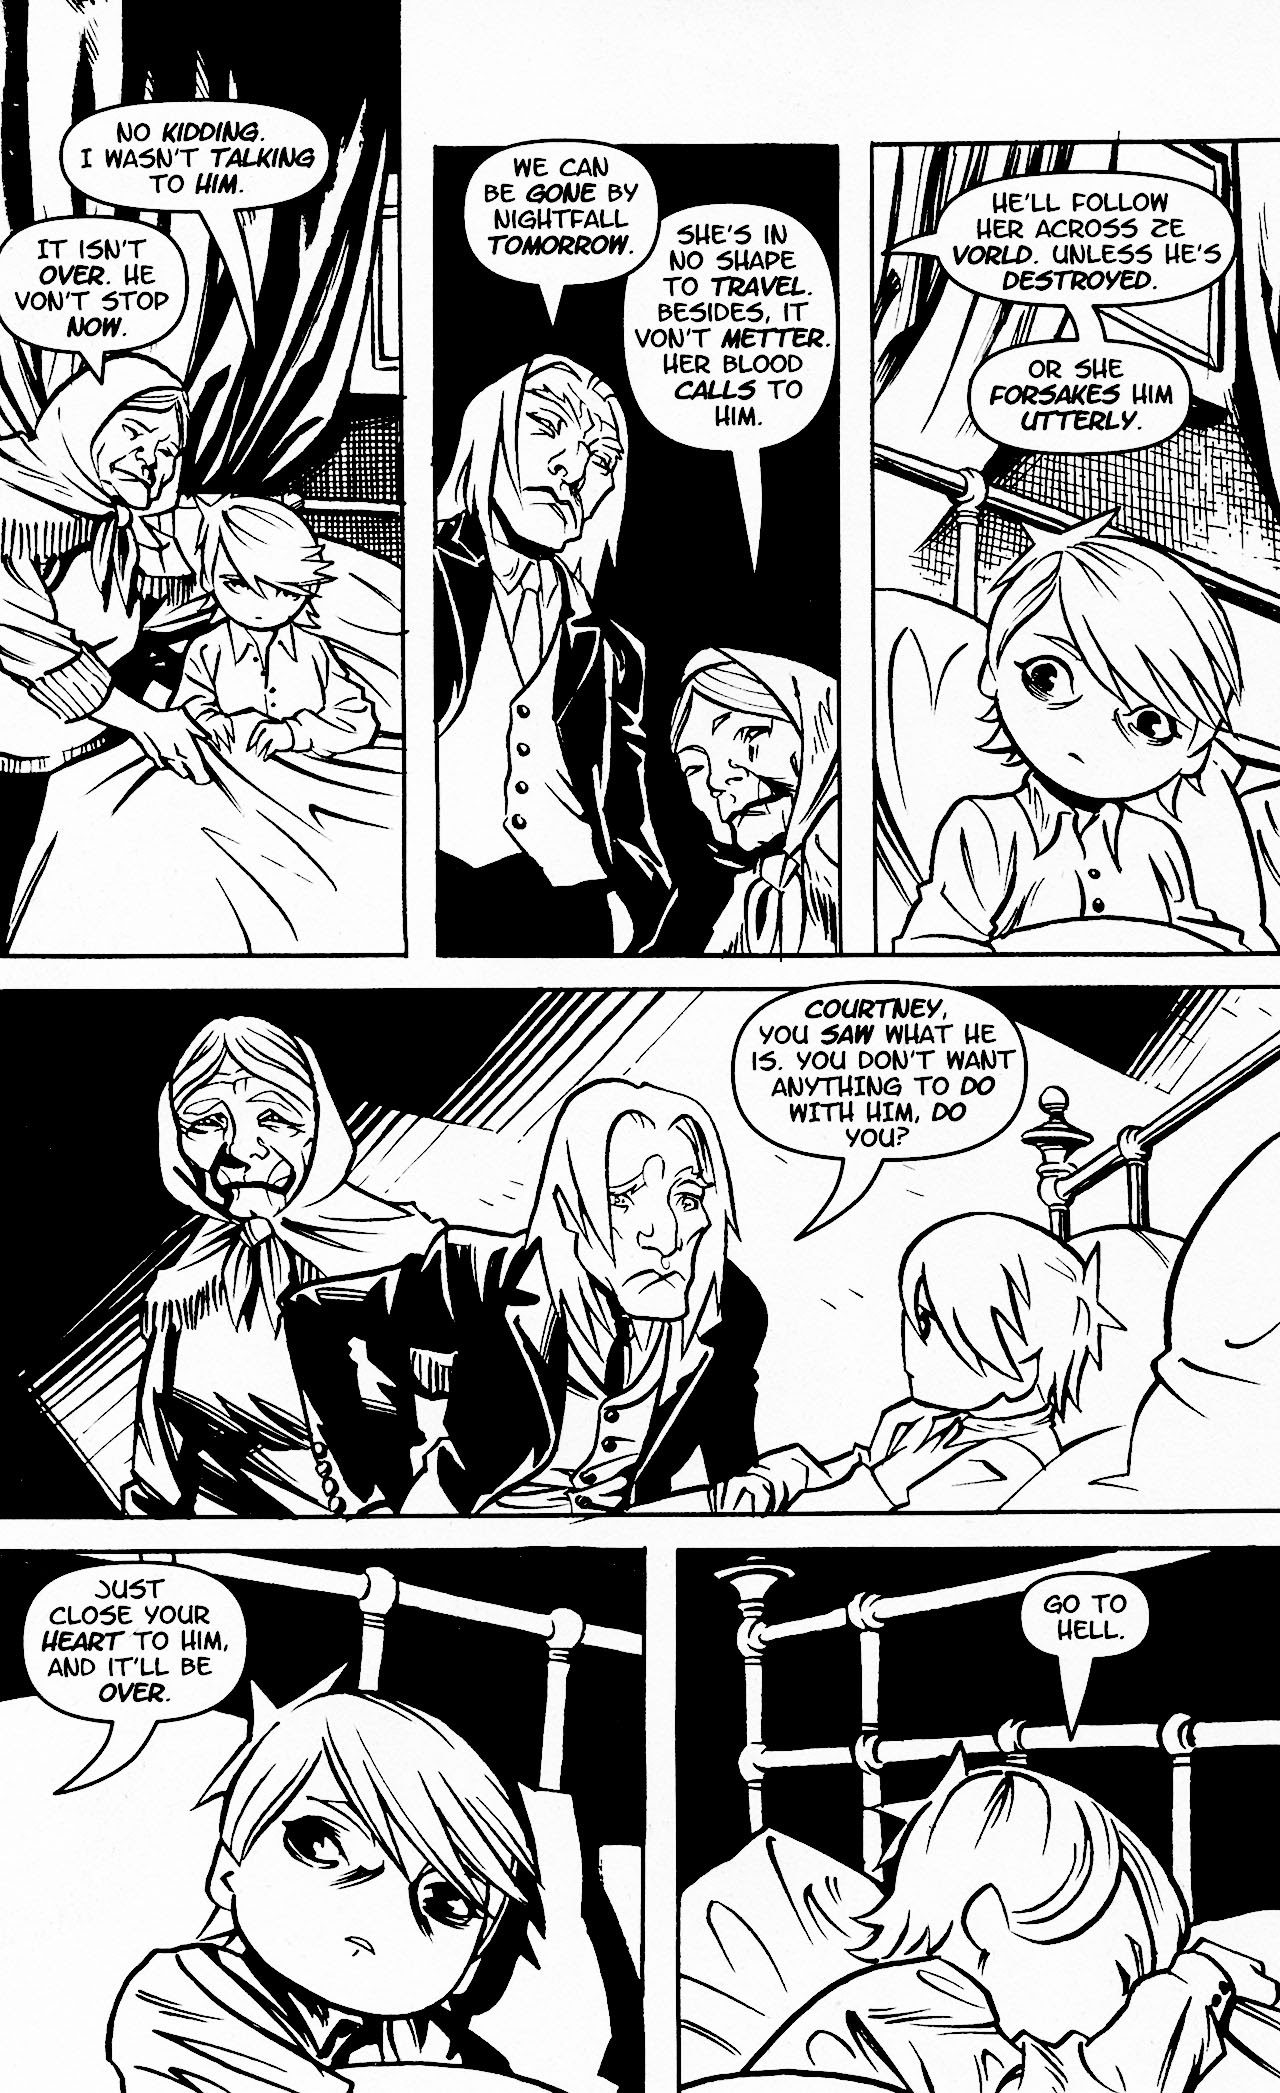 Read online Courtney Crumrin and the Prince of Nowhere comic -  Issue # Full - 42